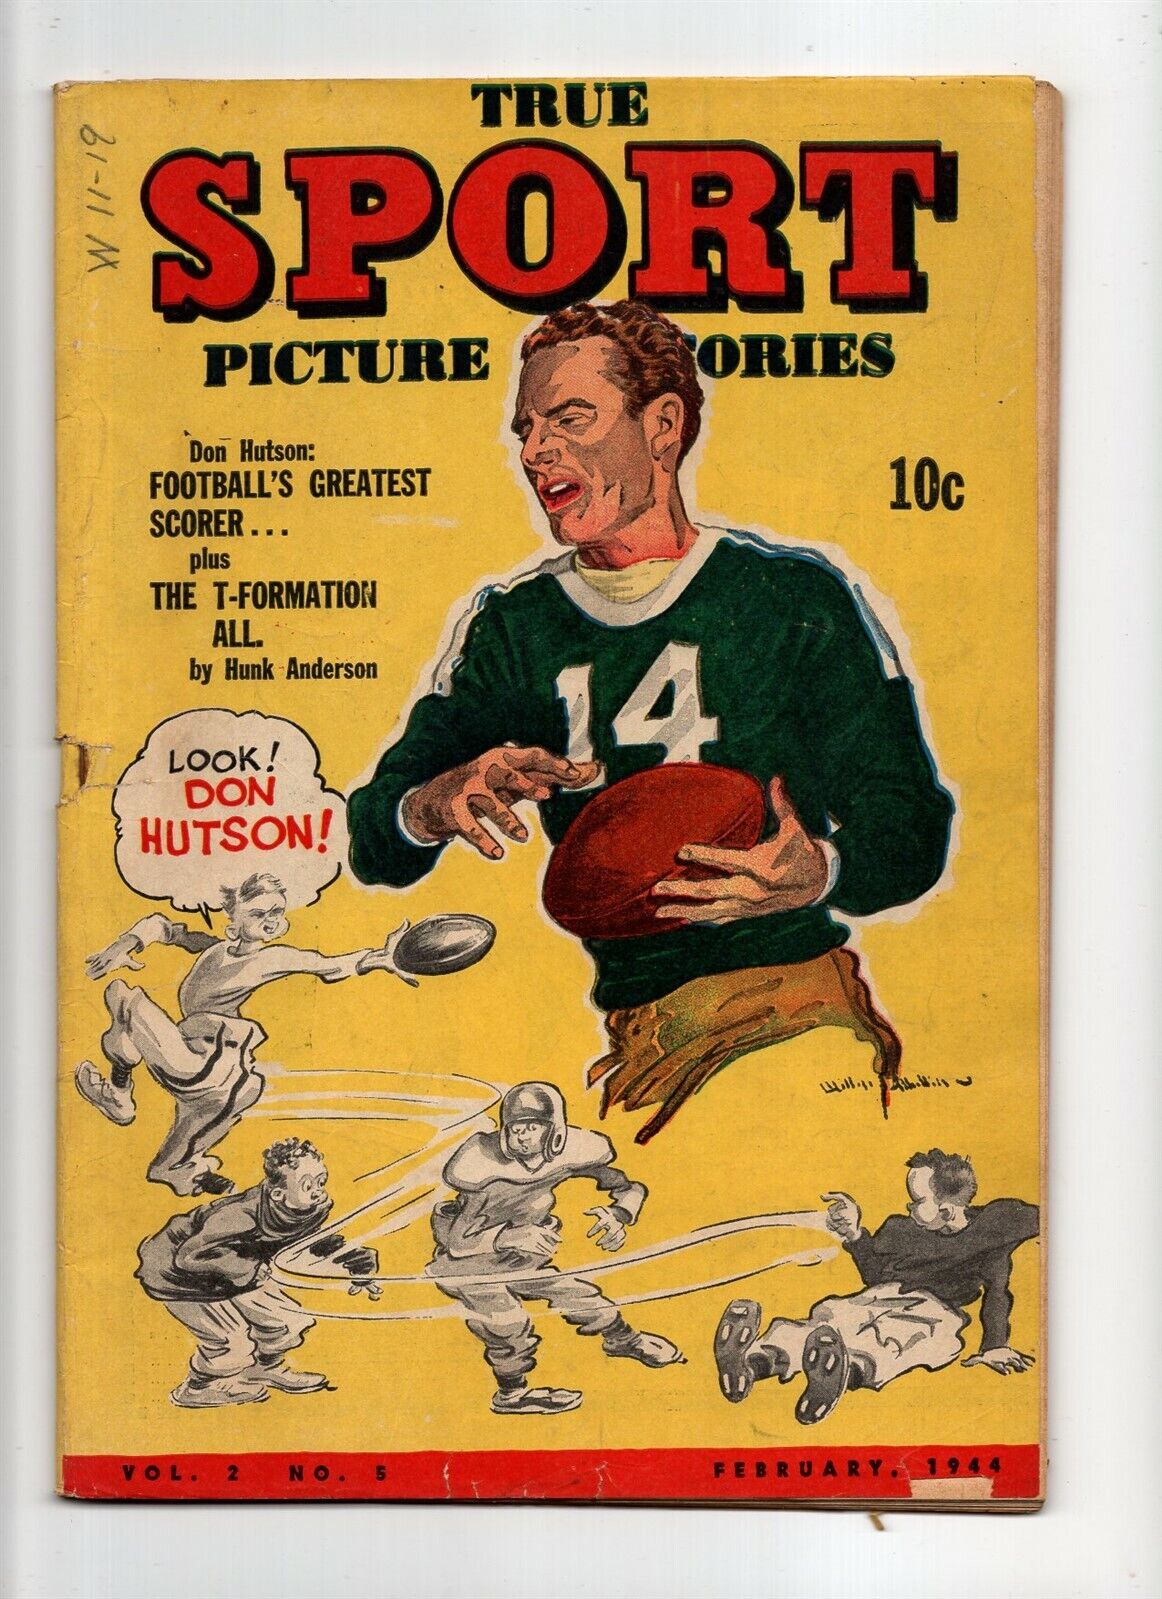 True Sport Picture Stories v2 #5 VINTAGE Street and Smith Comic Golden Age 10c